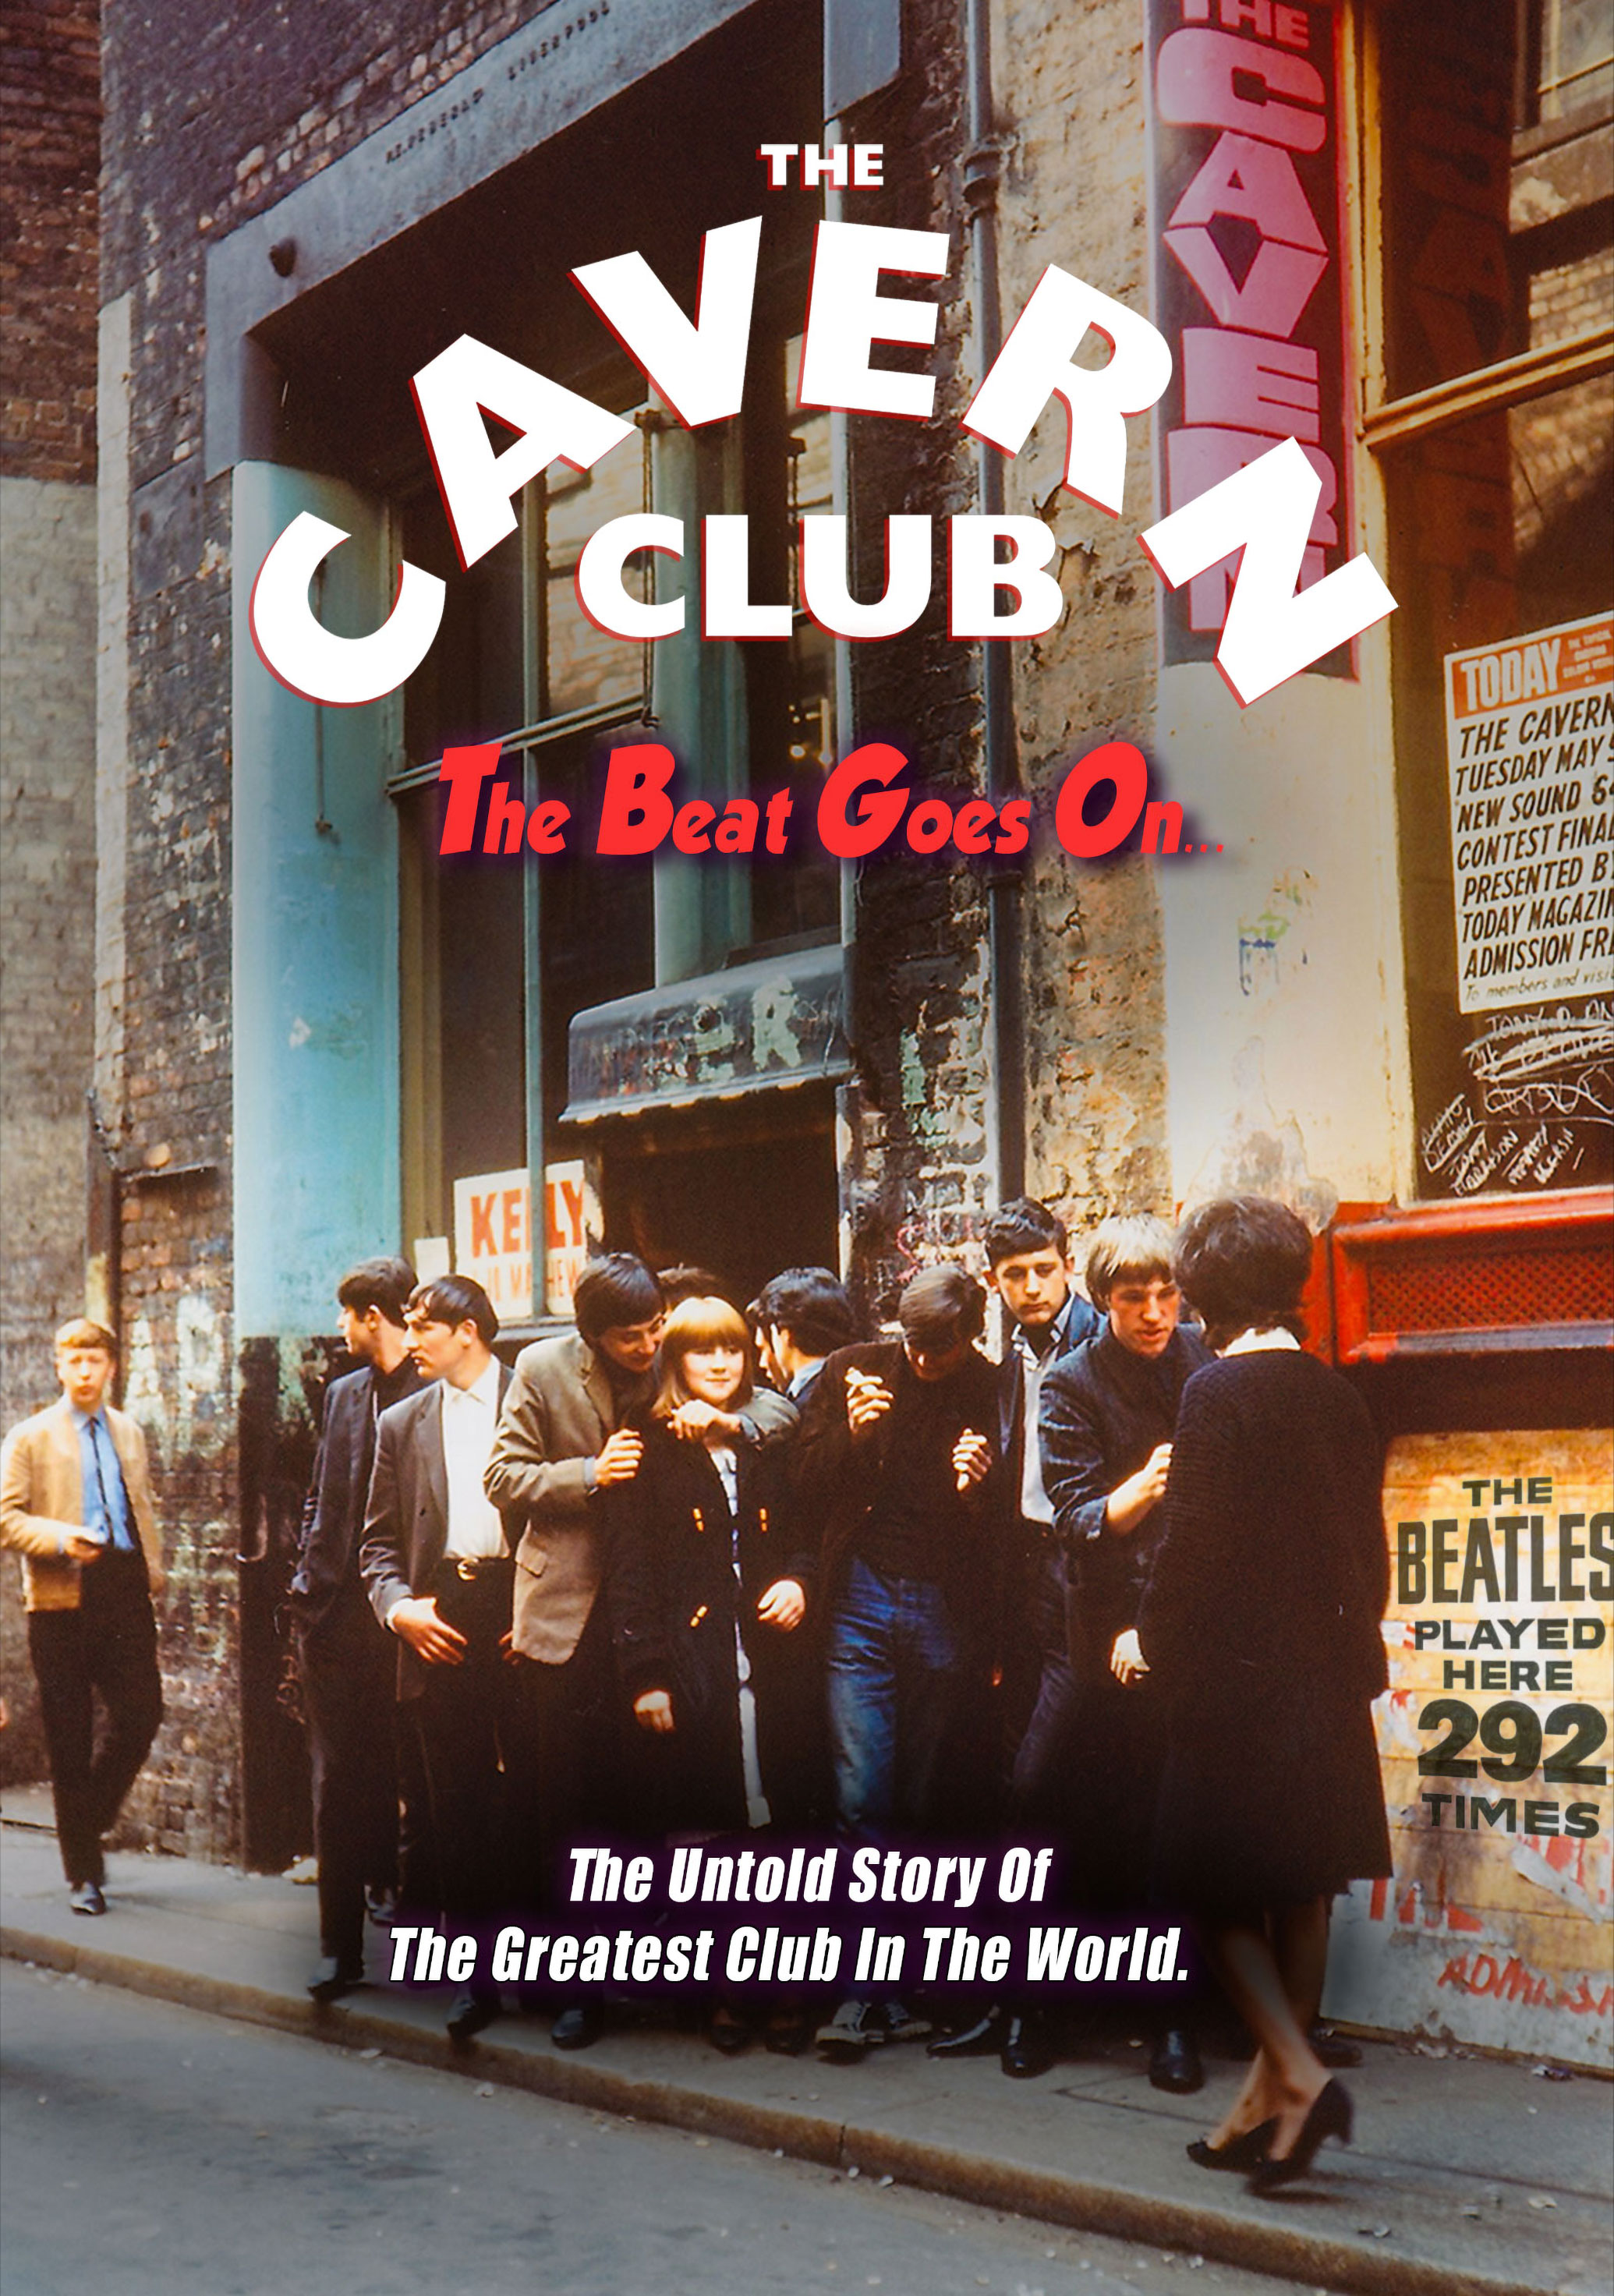 The Cavern Club: The Beat Goes On (0000) Documentary, Directed By Bill  Heckle